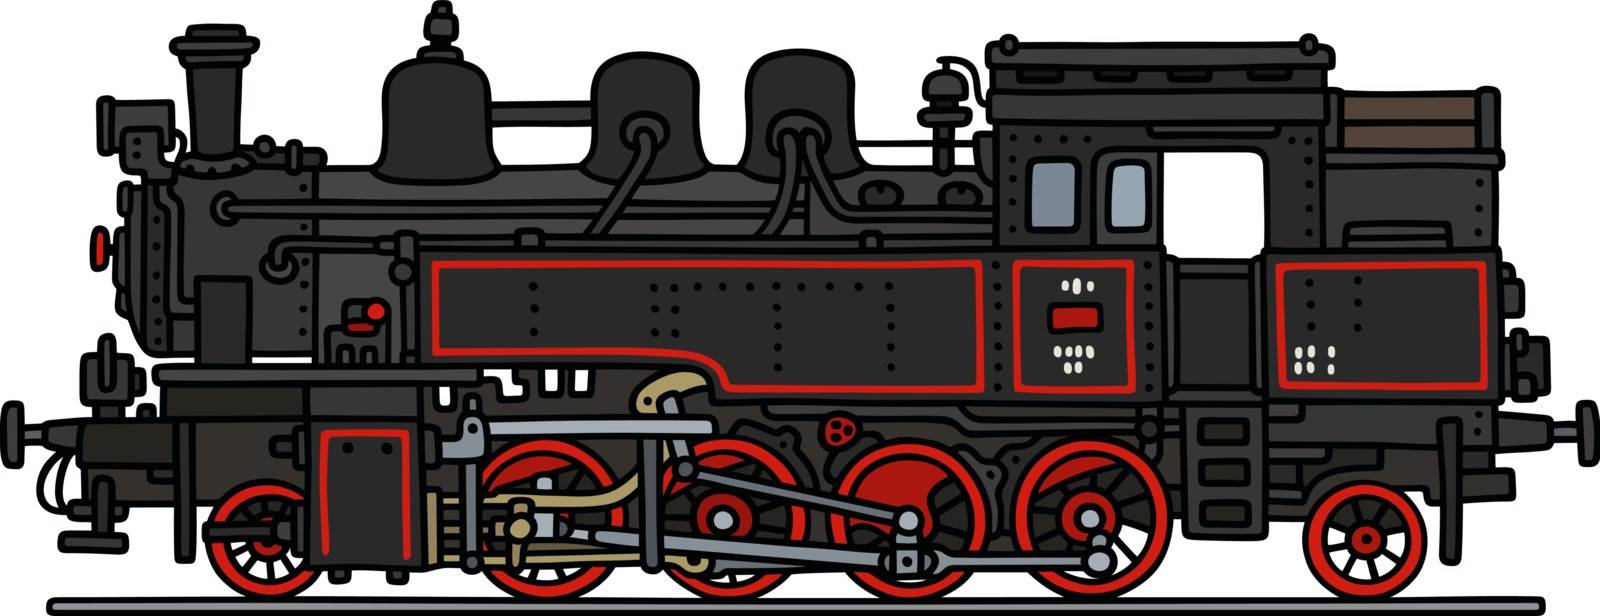 The vectorized hand drawing of a classic black steam locomotive